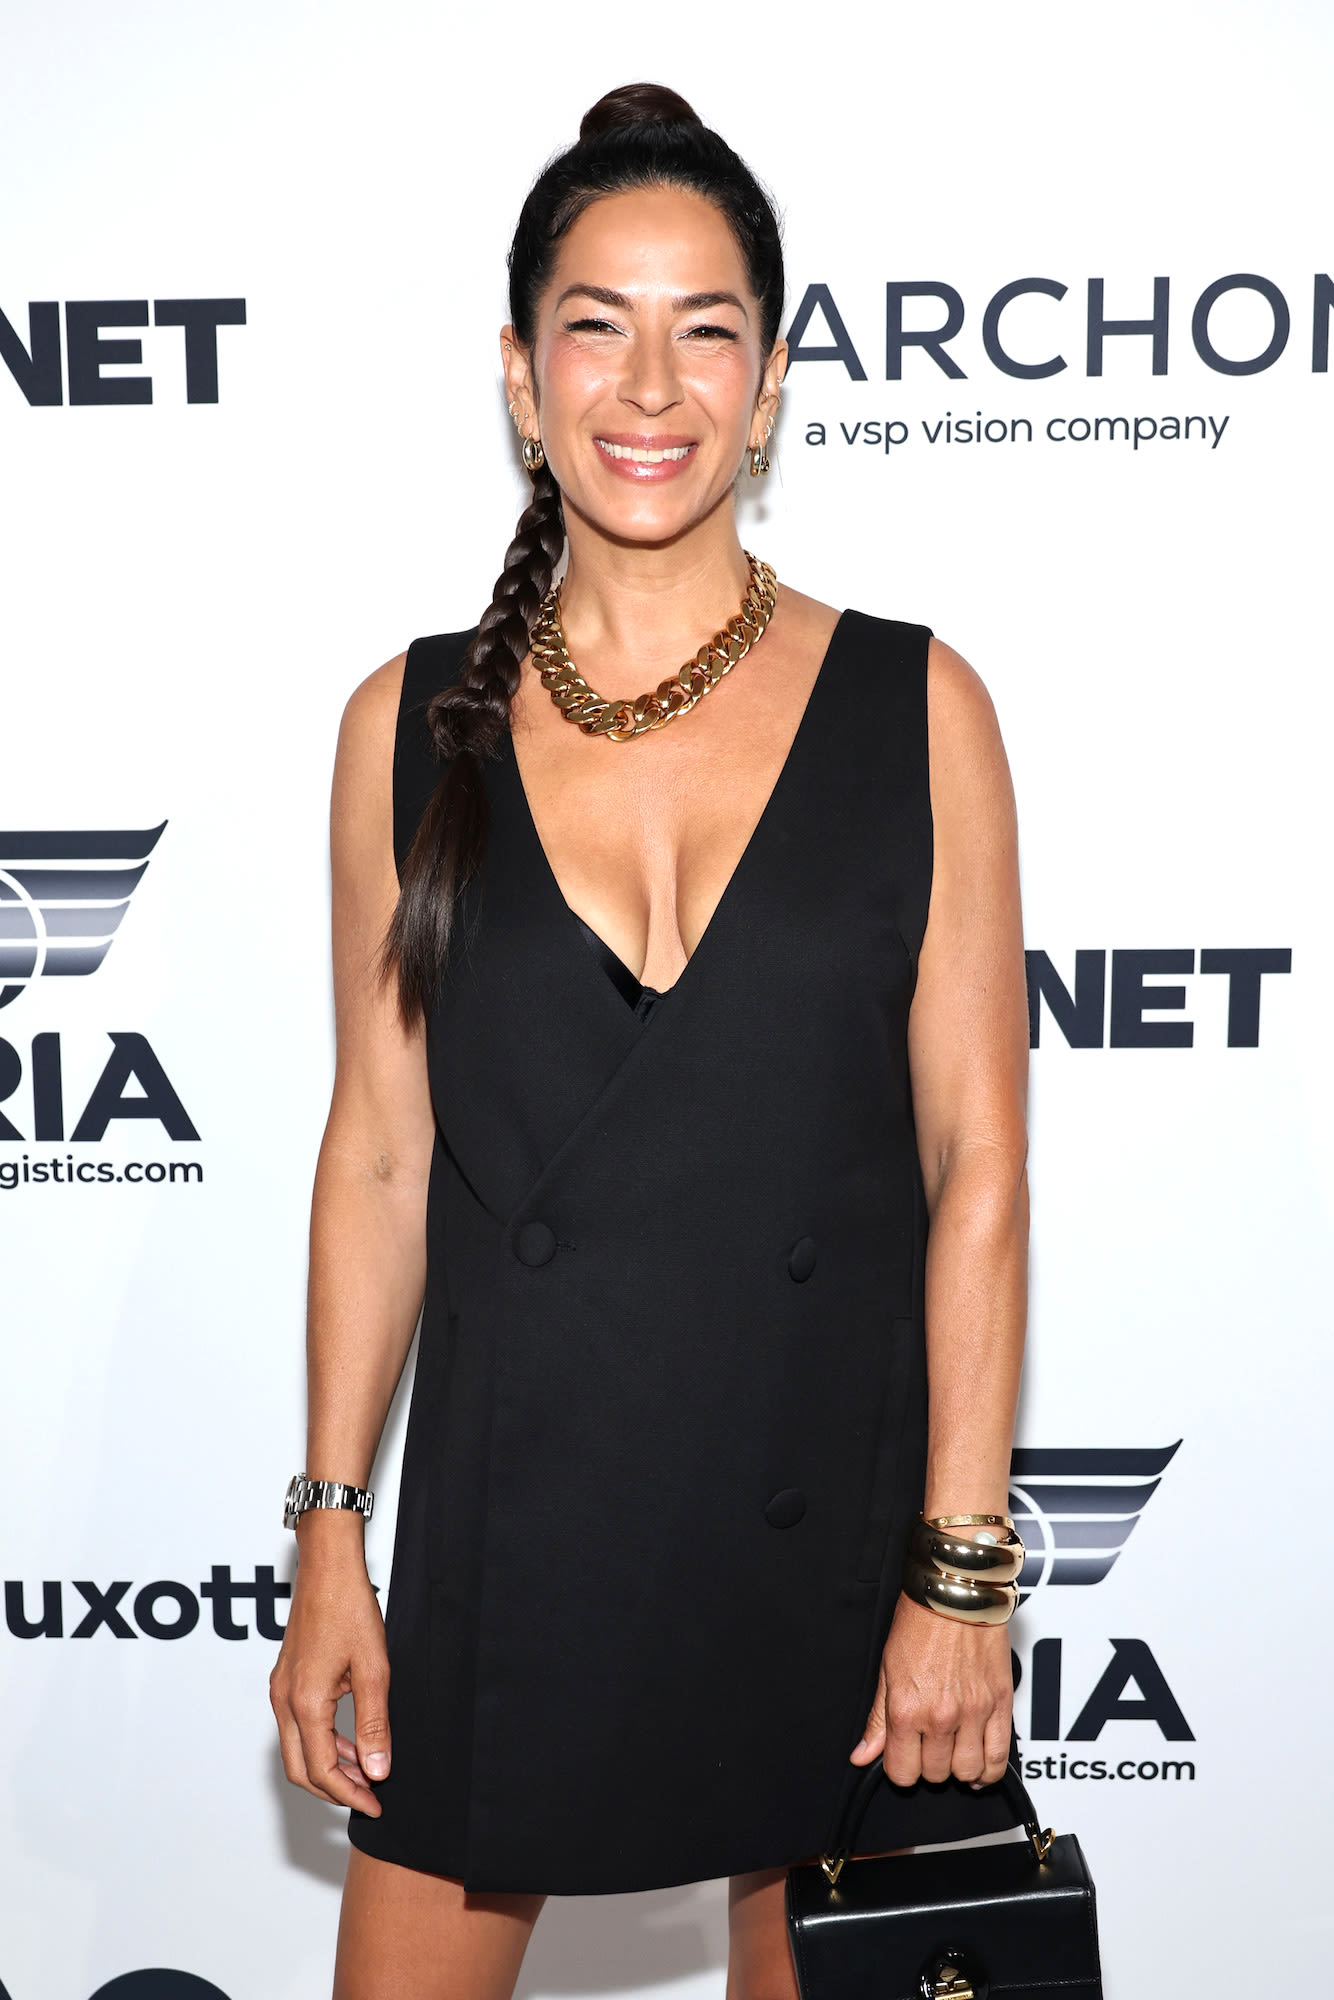 Rebecca Minkoff Hints at What She’d Want ‘RHONY’ Fans to See From Her